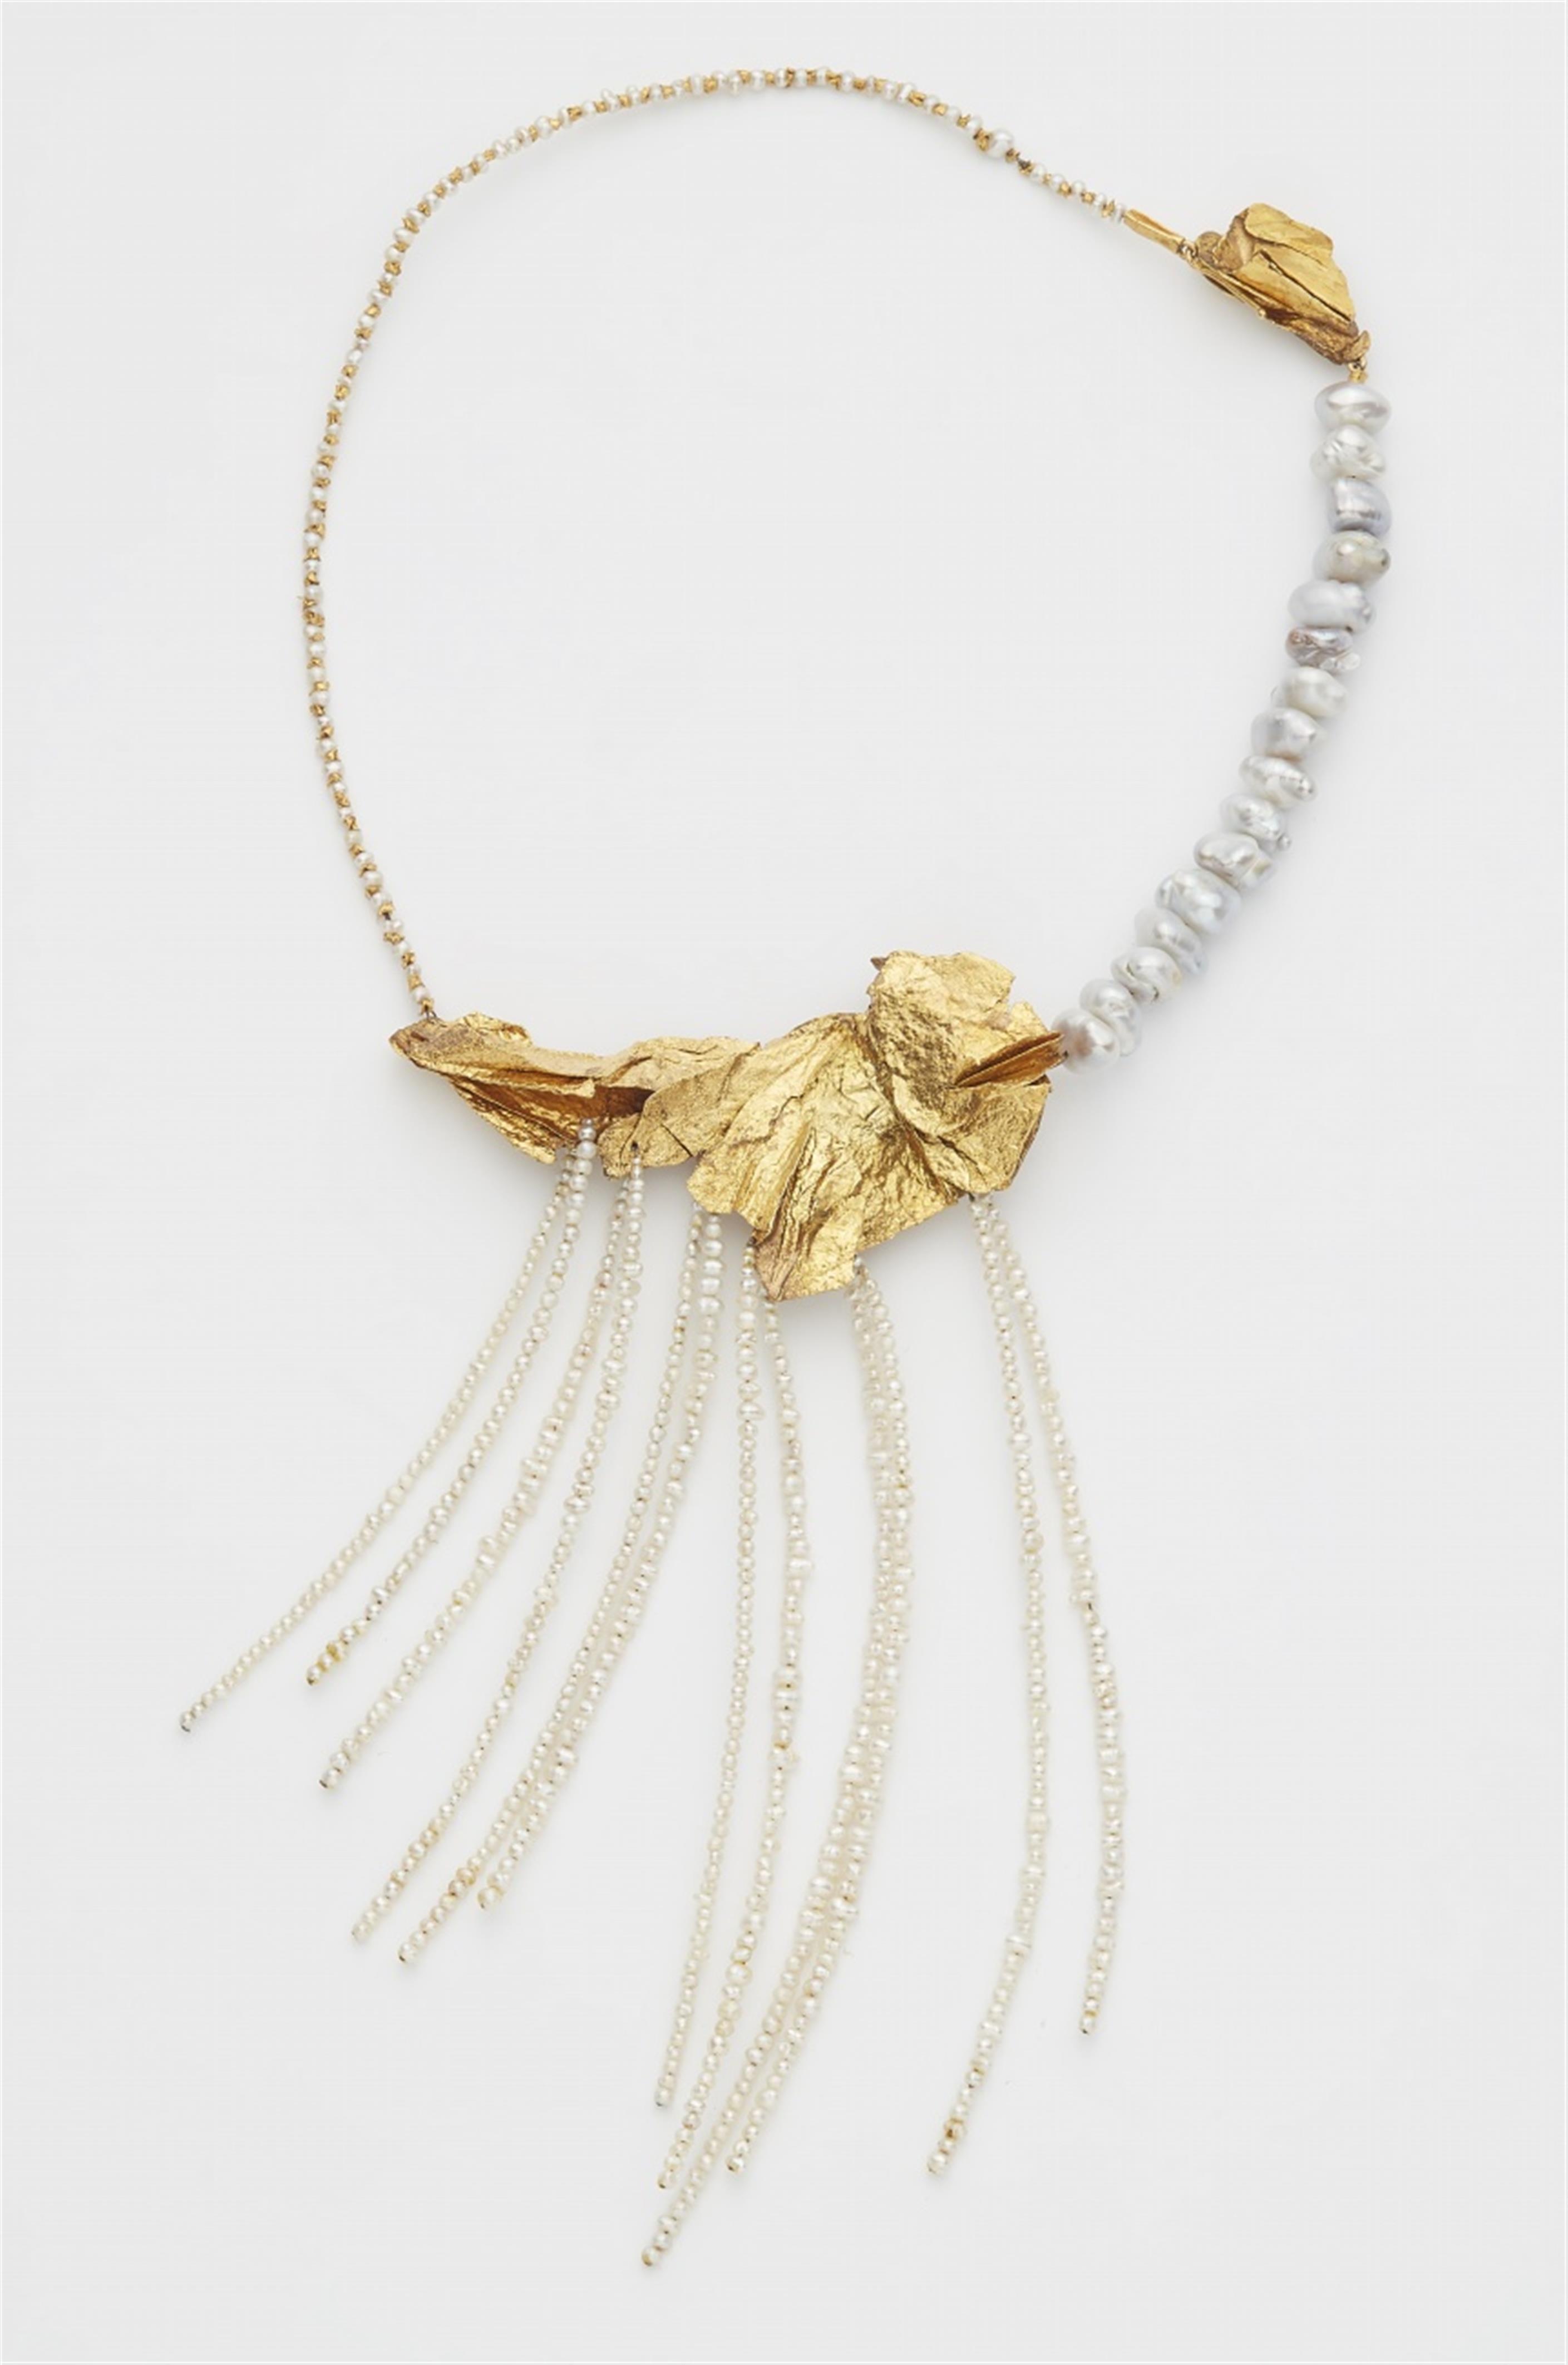 A 14k gold and pearl necklace - image-1